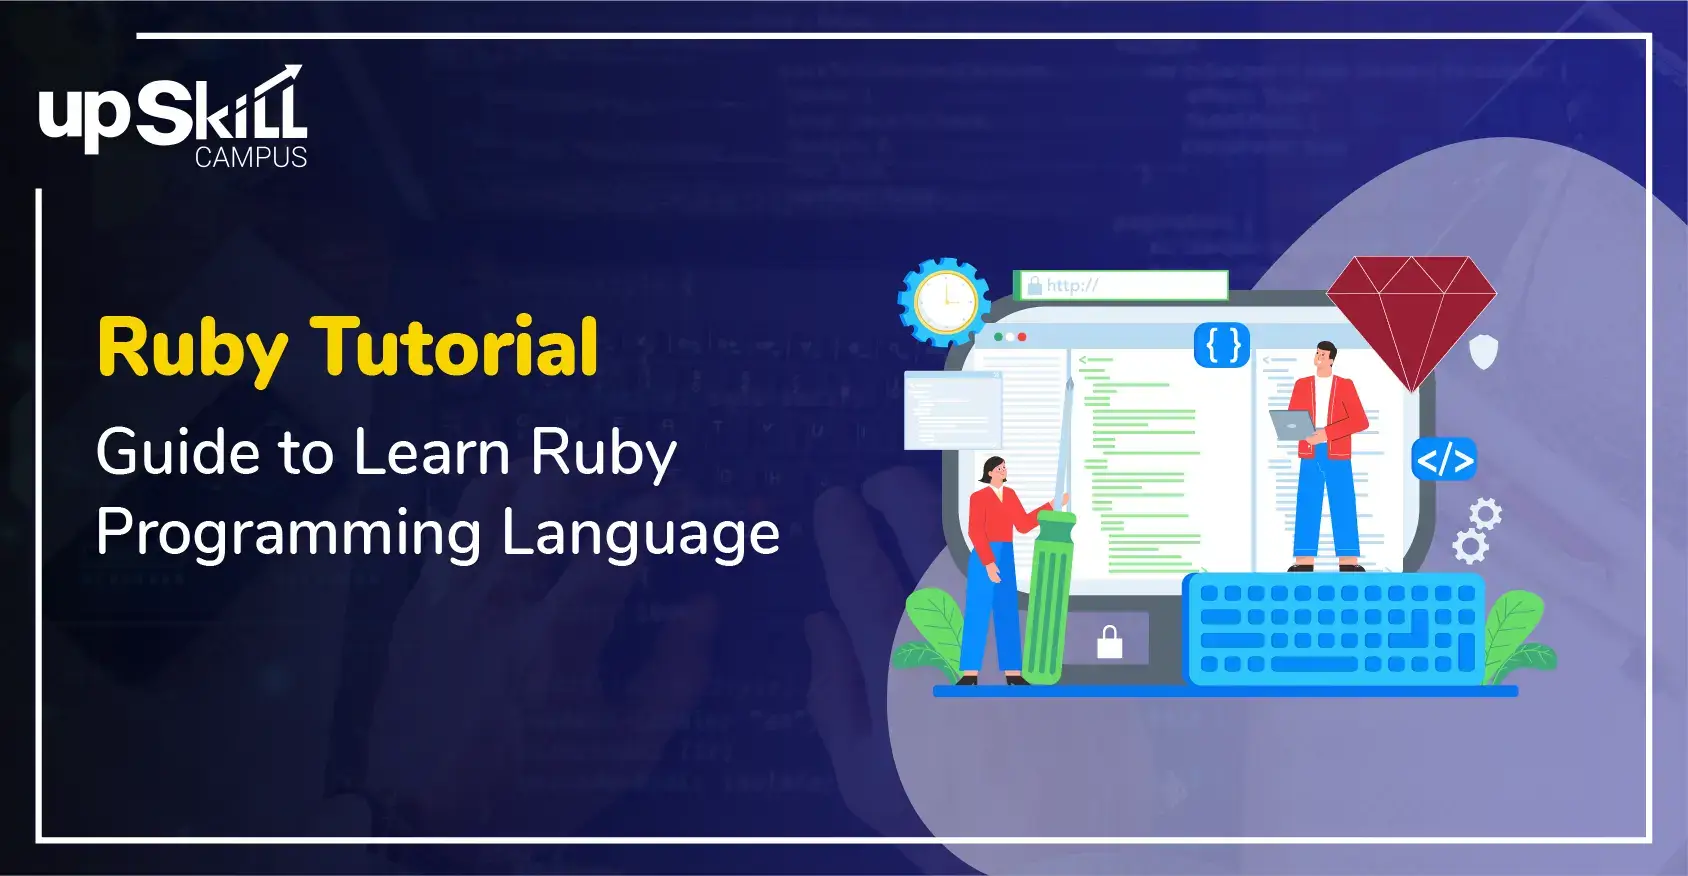 Ruby Tutorial - Guide to Learn